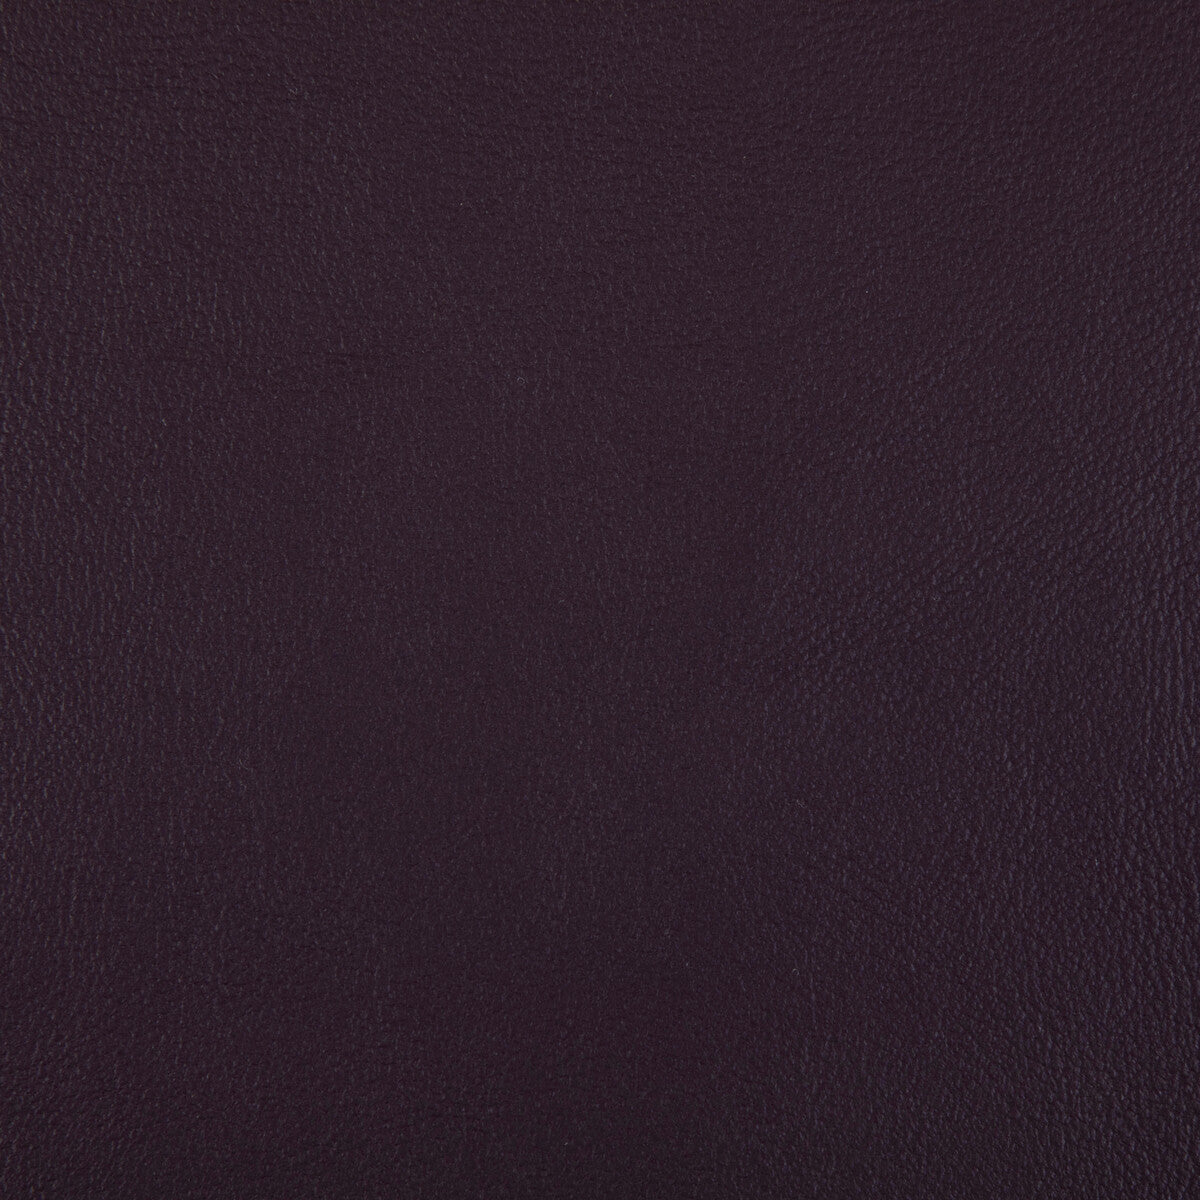 Rand fabric in plum color - pattern RAND.10.0 - by Kravet Contract